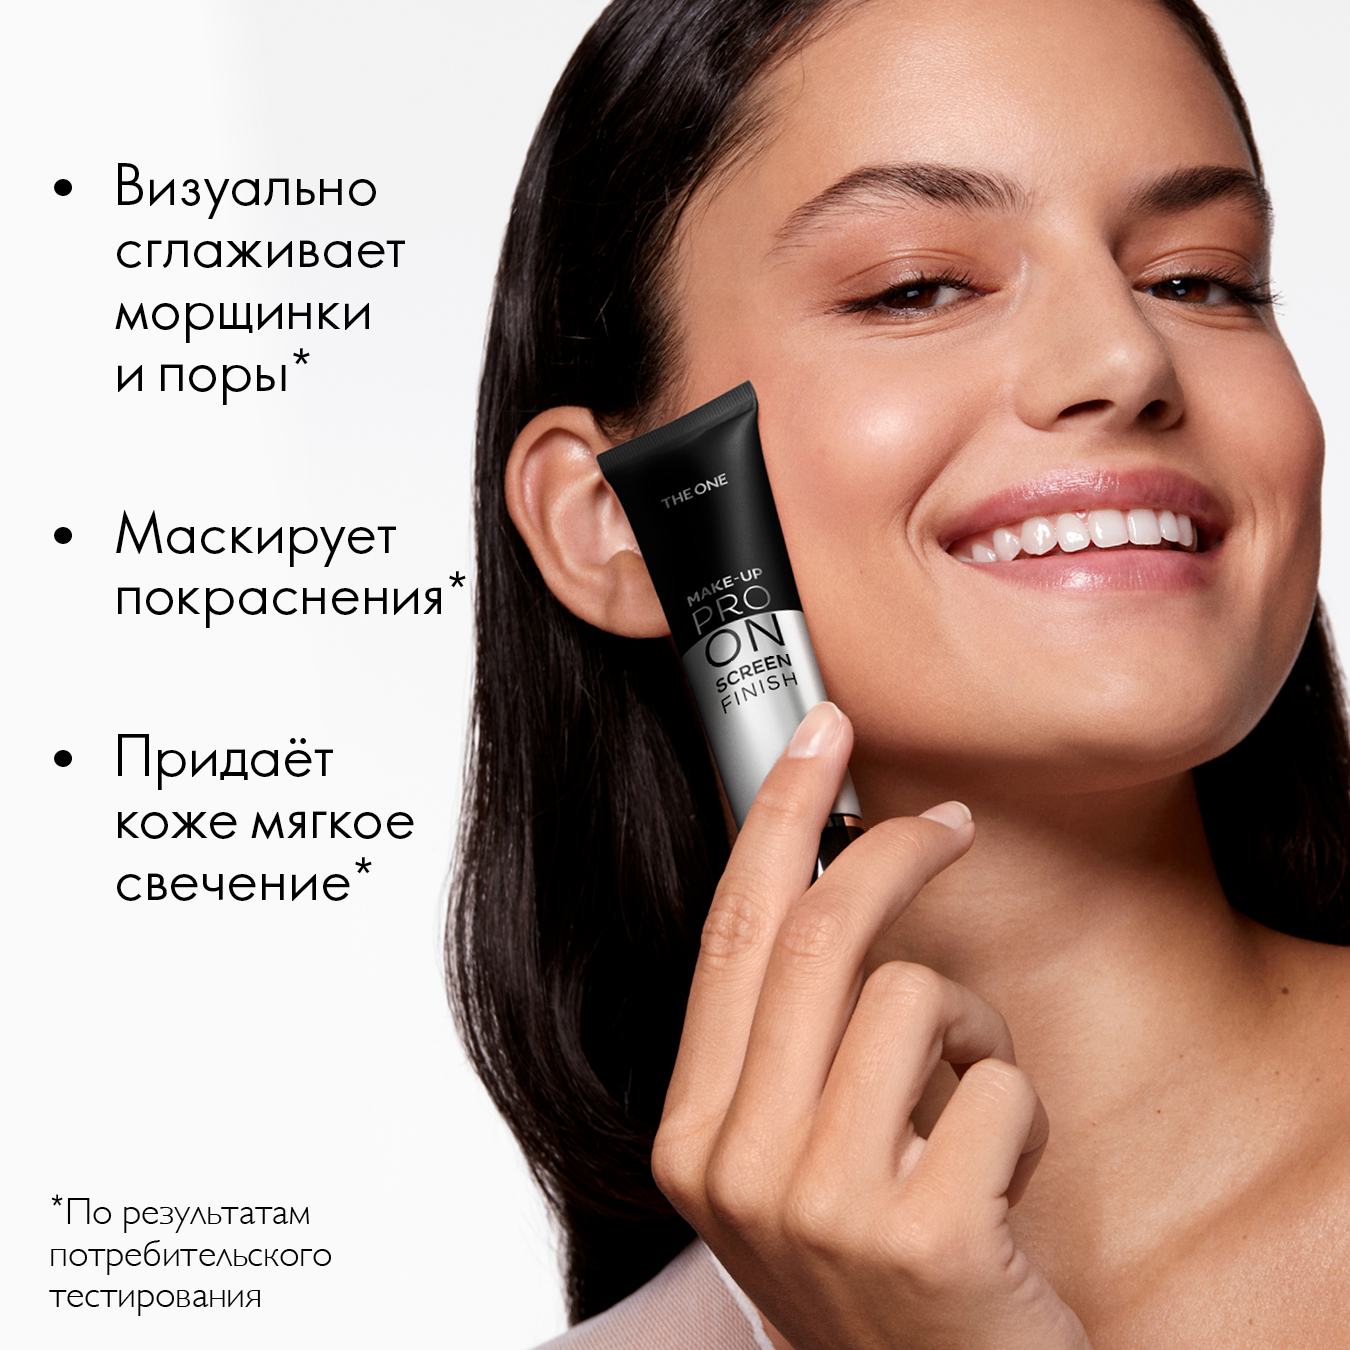 https://media-cdn.oriflame.com/productImage?externalMediaId=product-management-media%2fProducts%2f44547%2fBY%2f44547_6.png&id=17749214&version=1